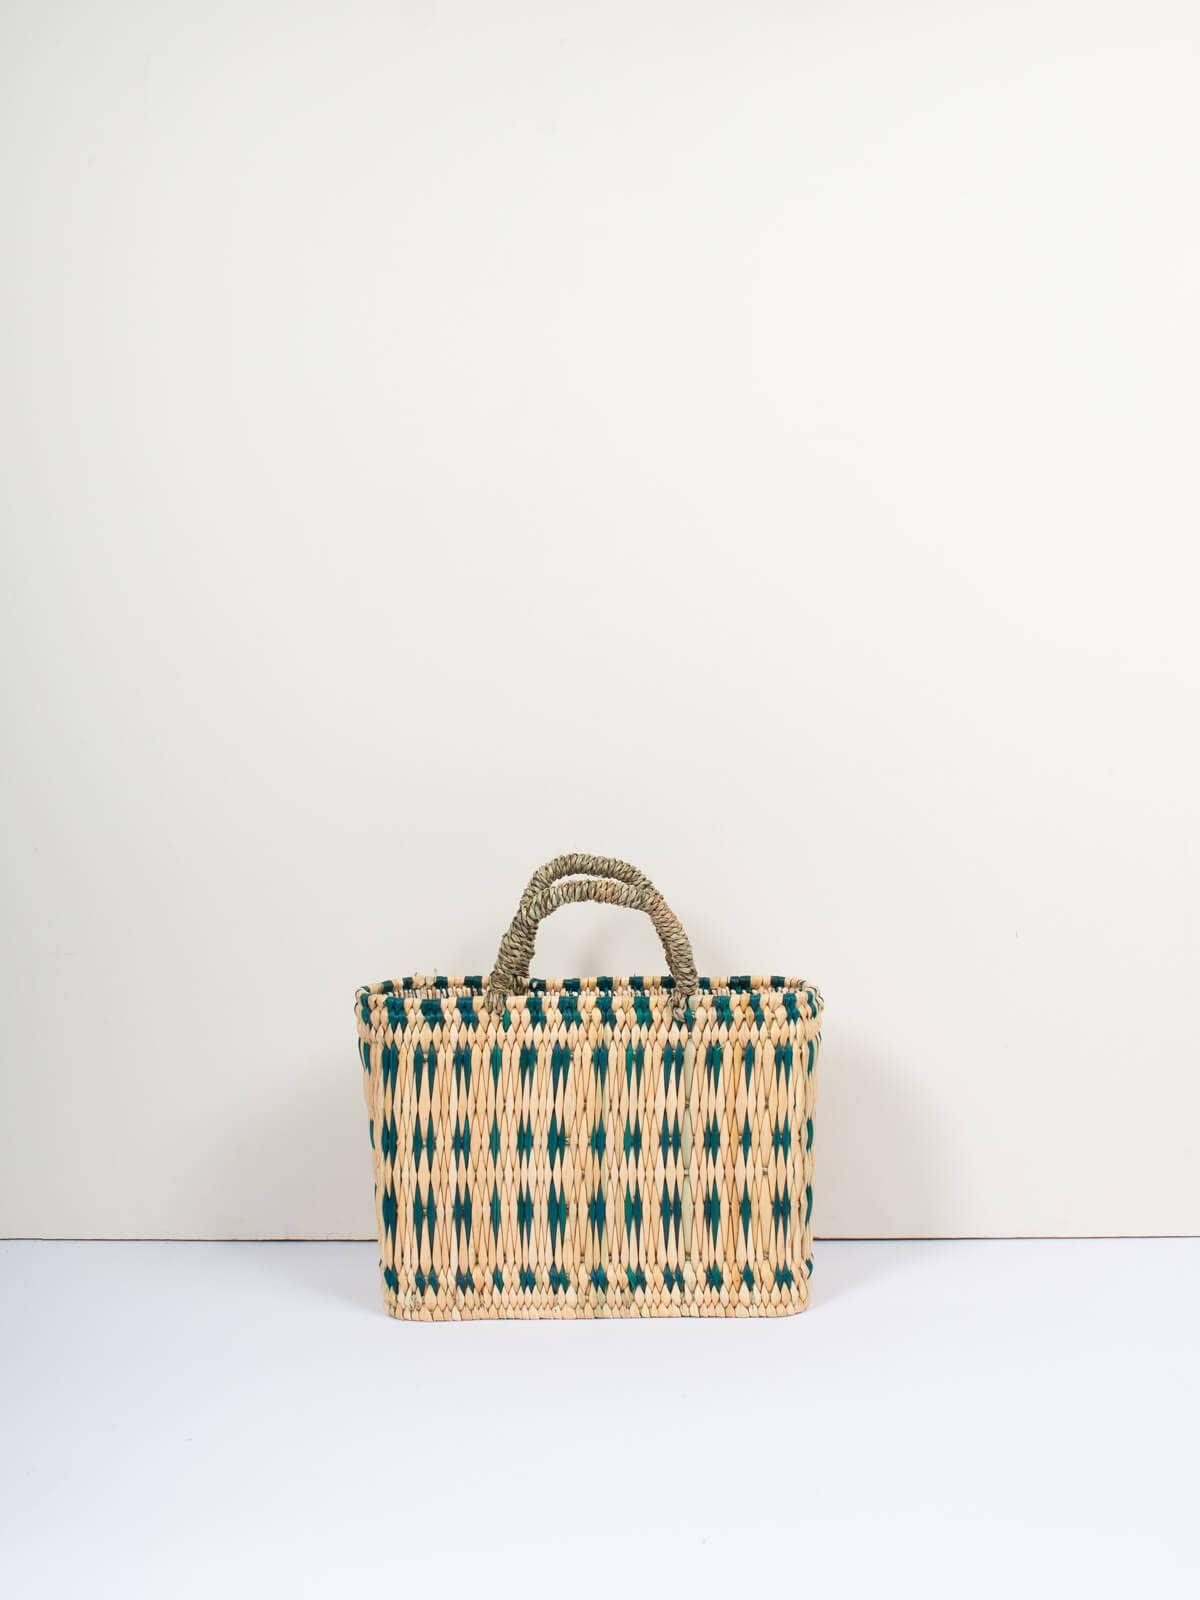 Woven Reed Basket, Green Set of 3 - Haven